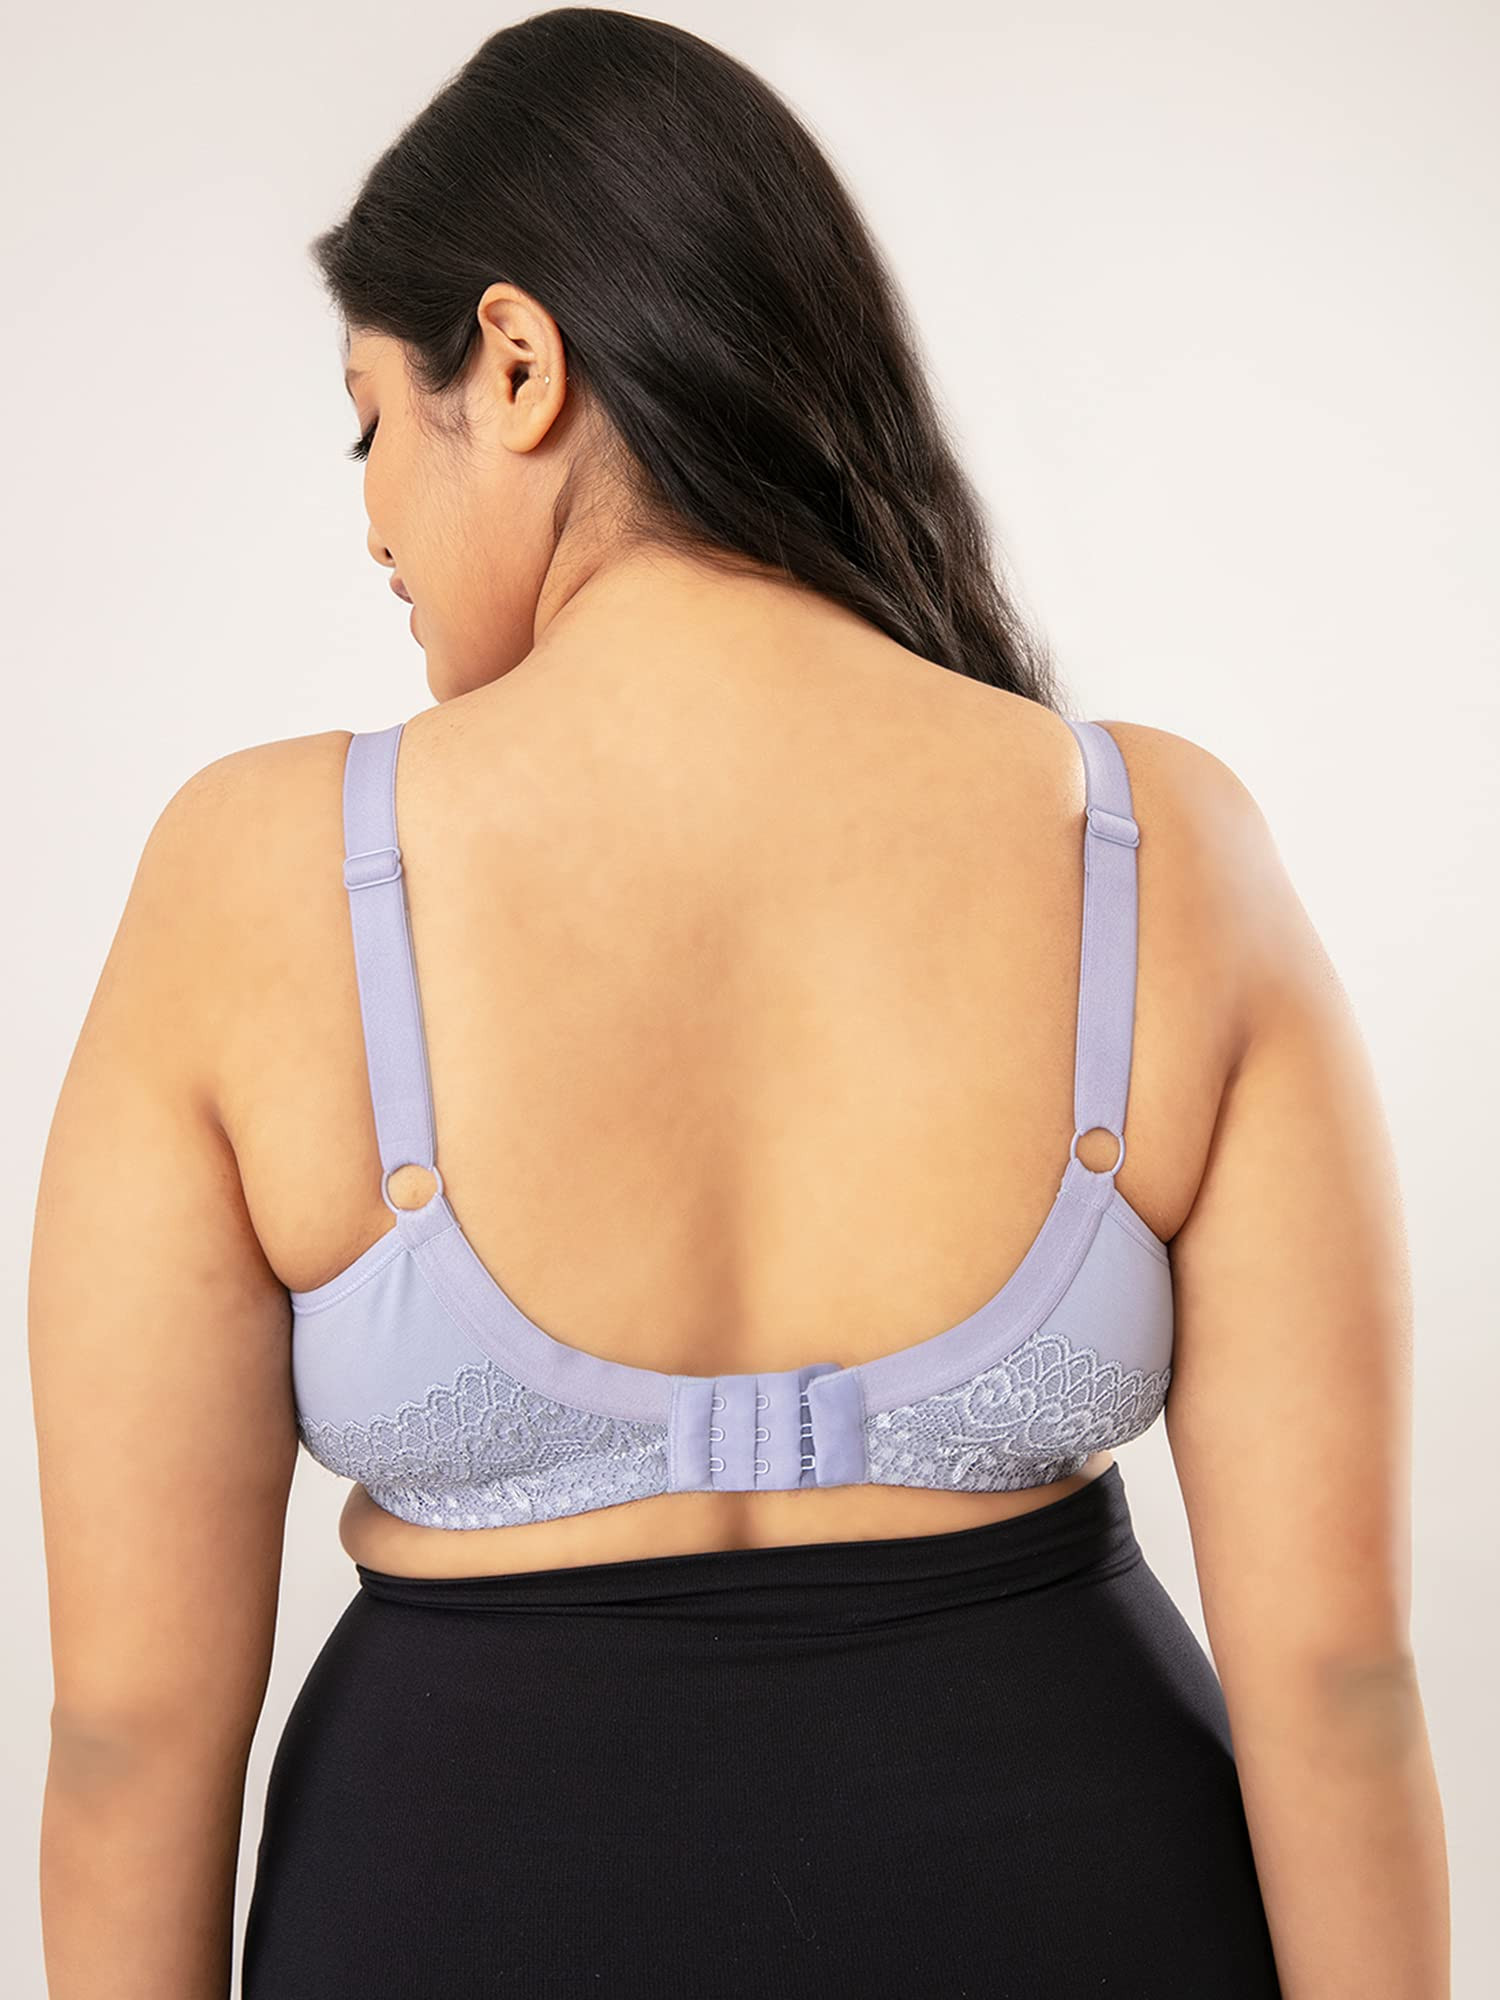 Buy Nykd By Nykaa Posture Corrector Bra For Women, Non-Padded